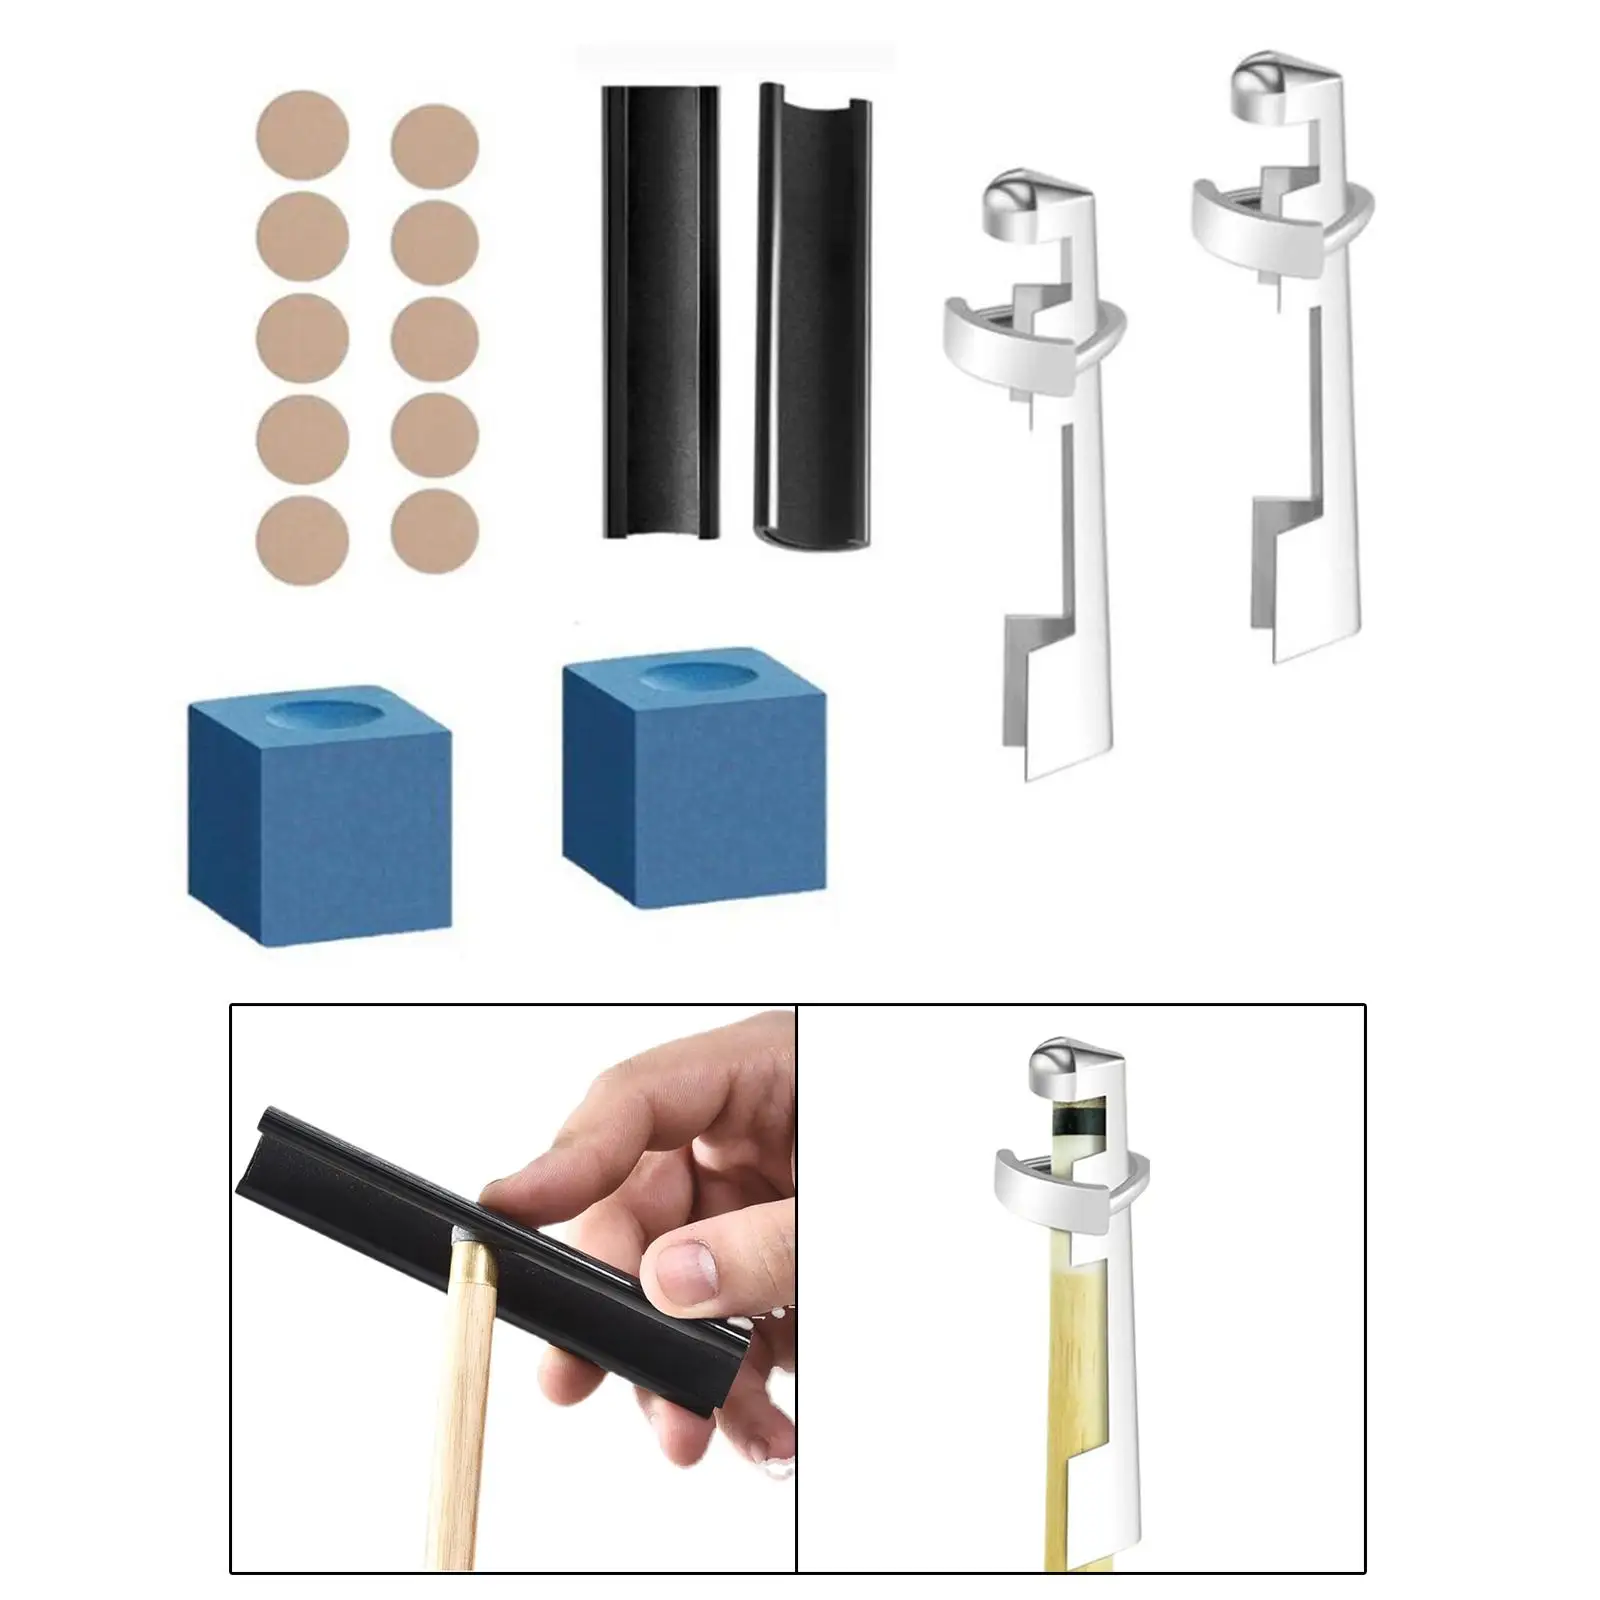 16x Pool Cue Repair Set Chalk Stick with Tip Clamp Tips Holder Fixing DIY